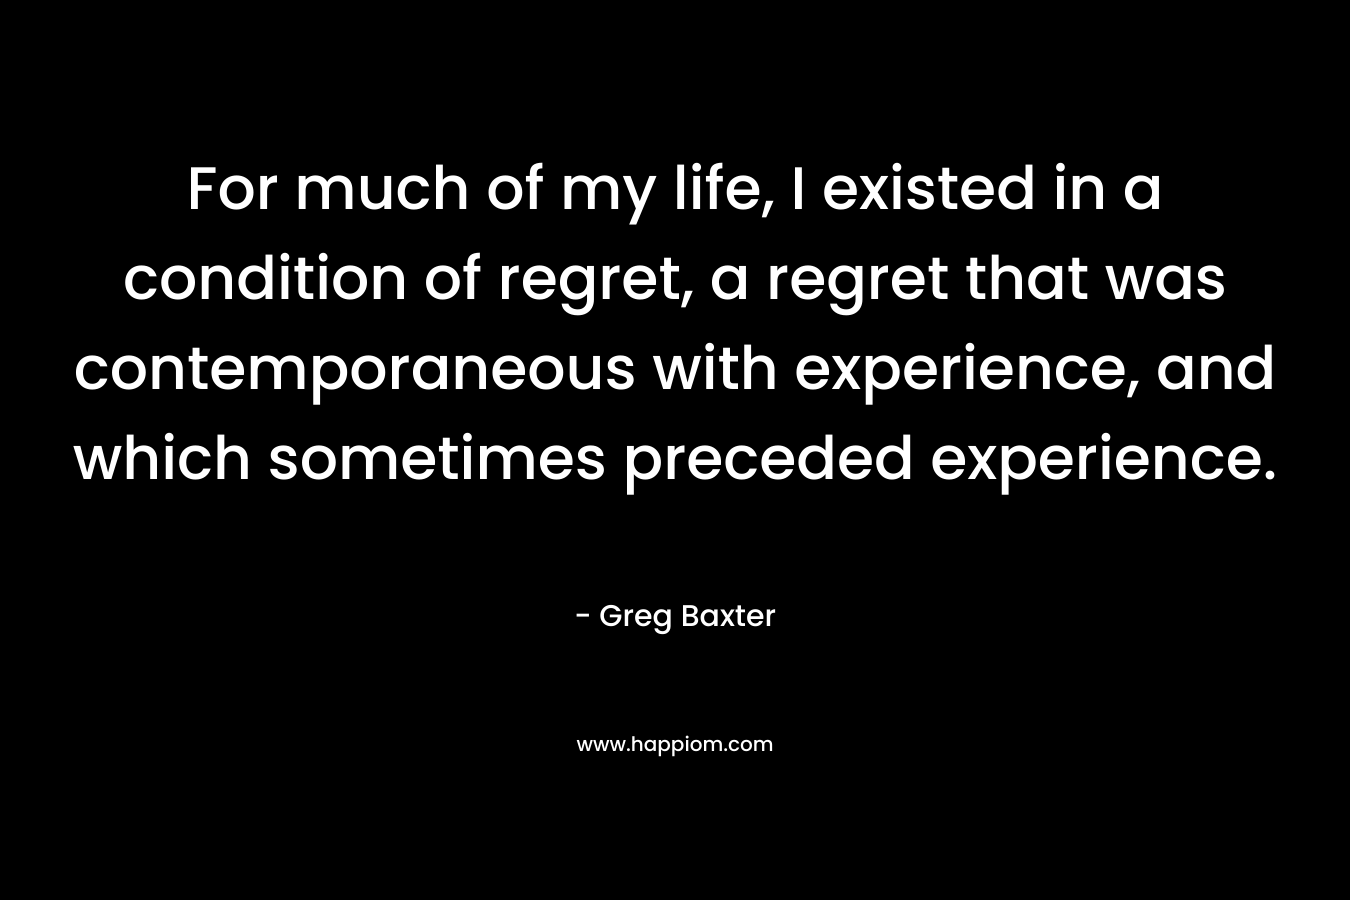 For much of my life, I existed in a condition of regret, a regret that was contemporaneous with experience, and which sometimes preceded experience.